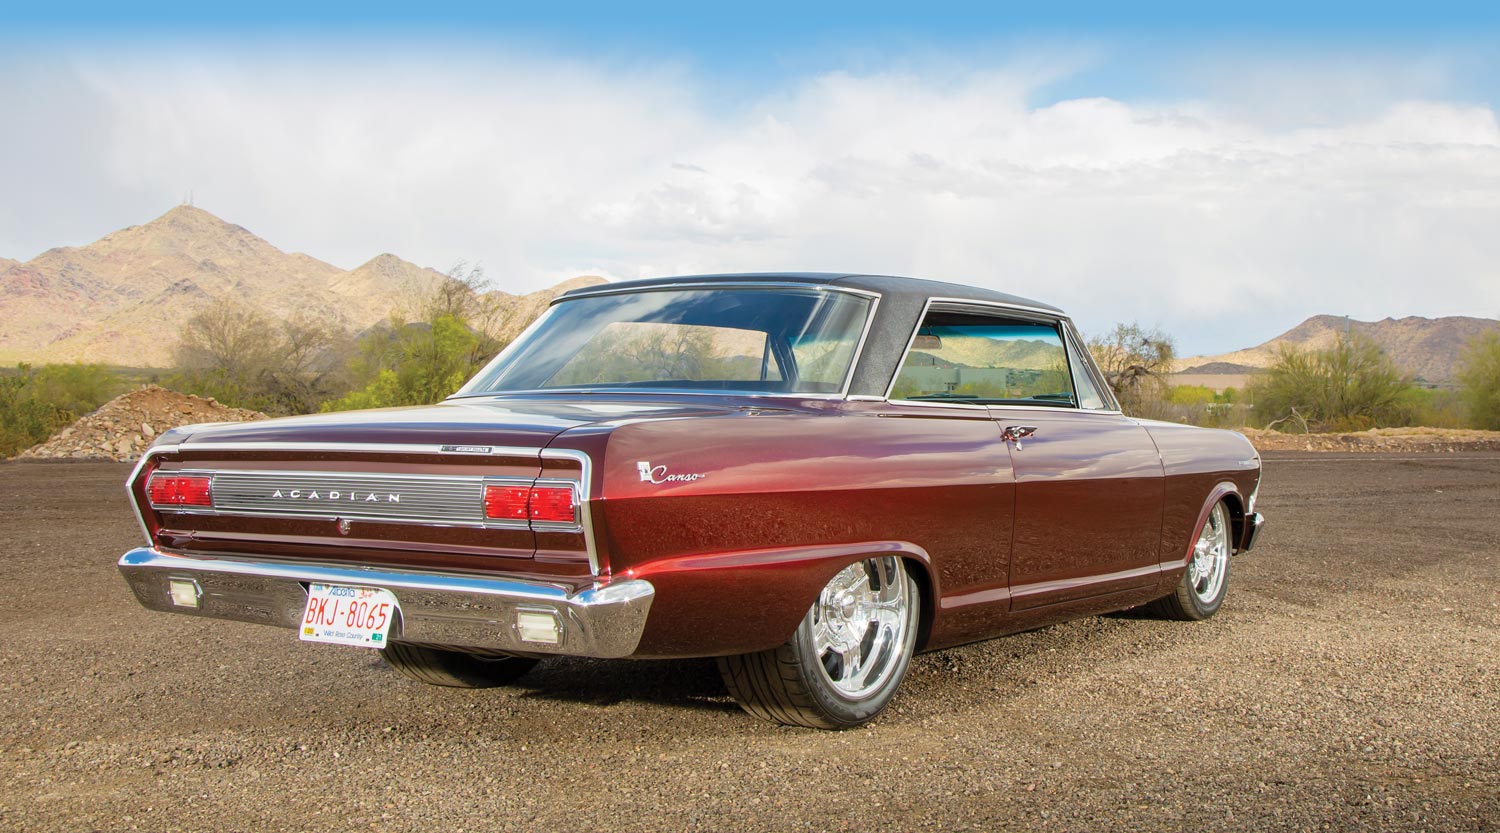 ’65 Acadian Canso Sport Deluxe's rear side view